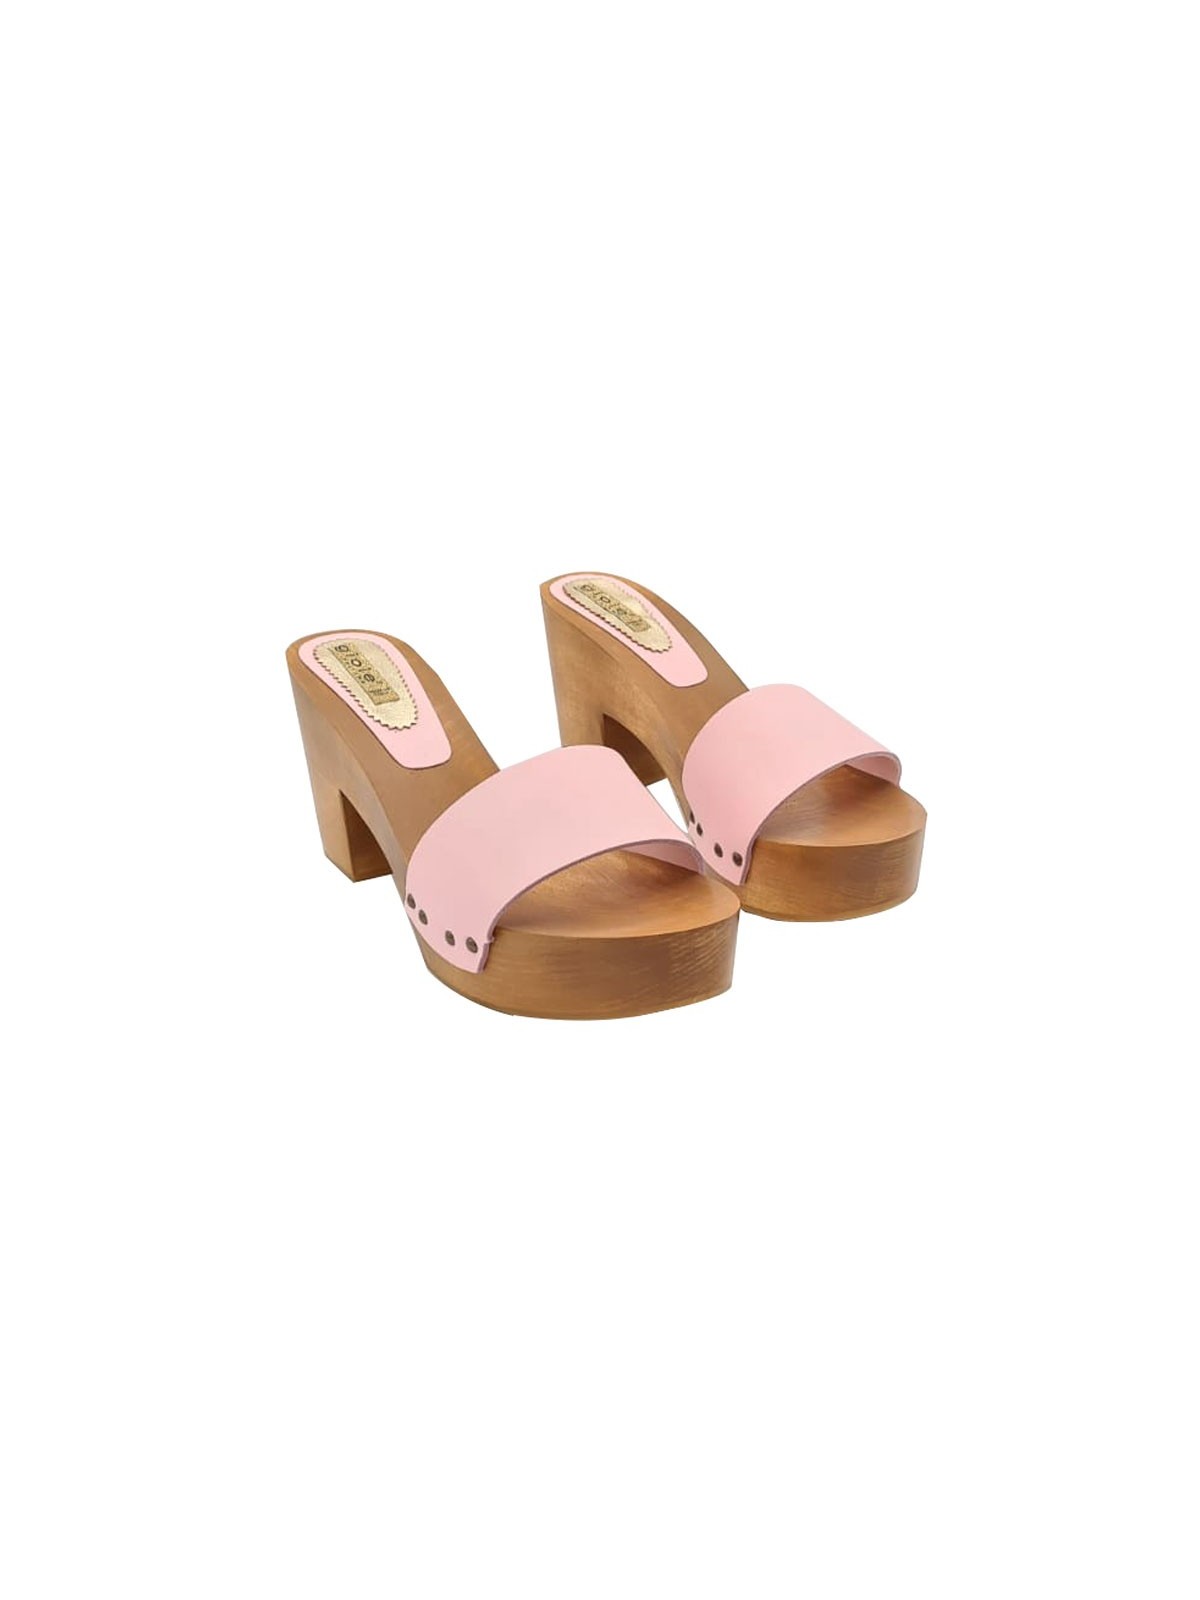 CLOGS WITH PINK LEATHER BAND AND HEEL 9